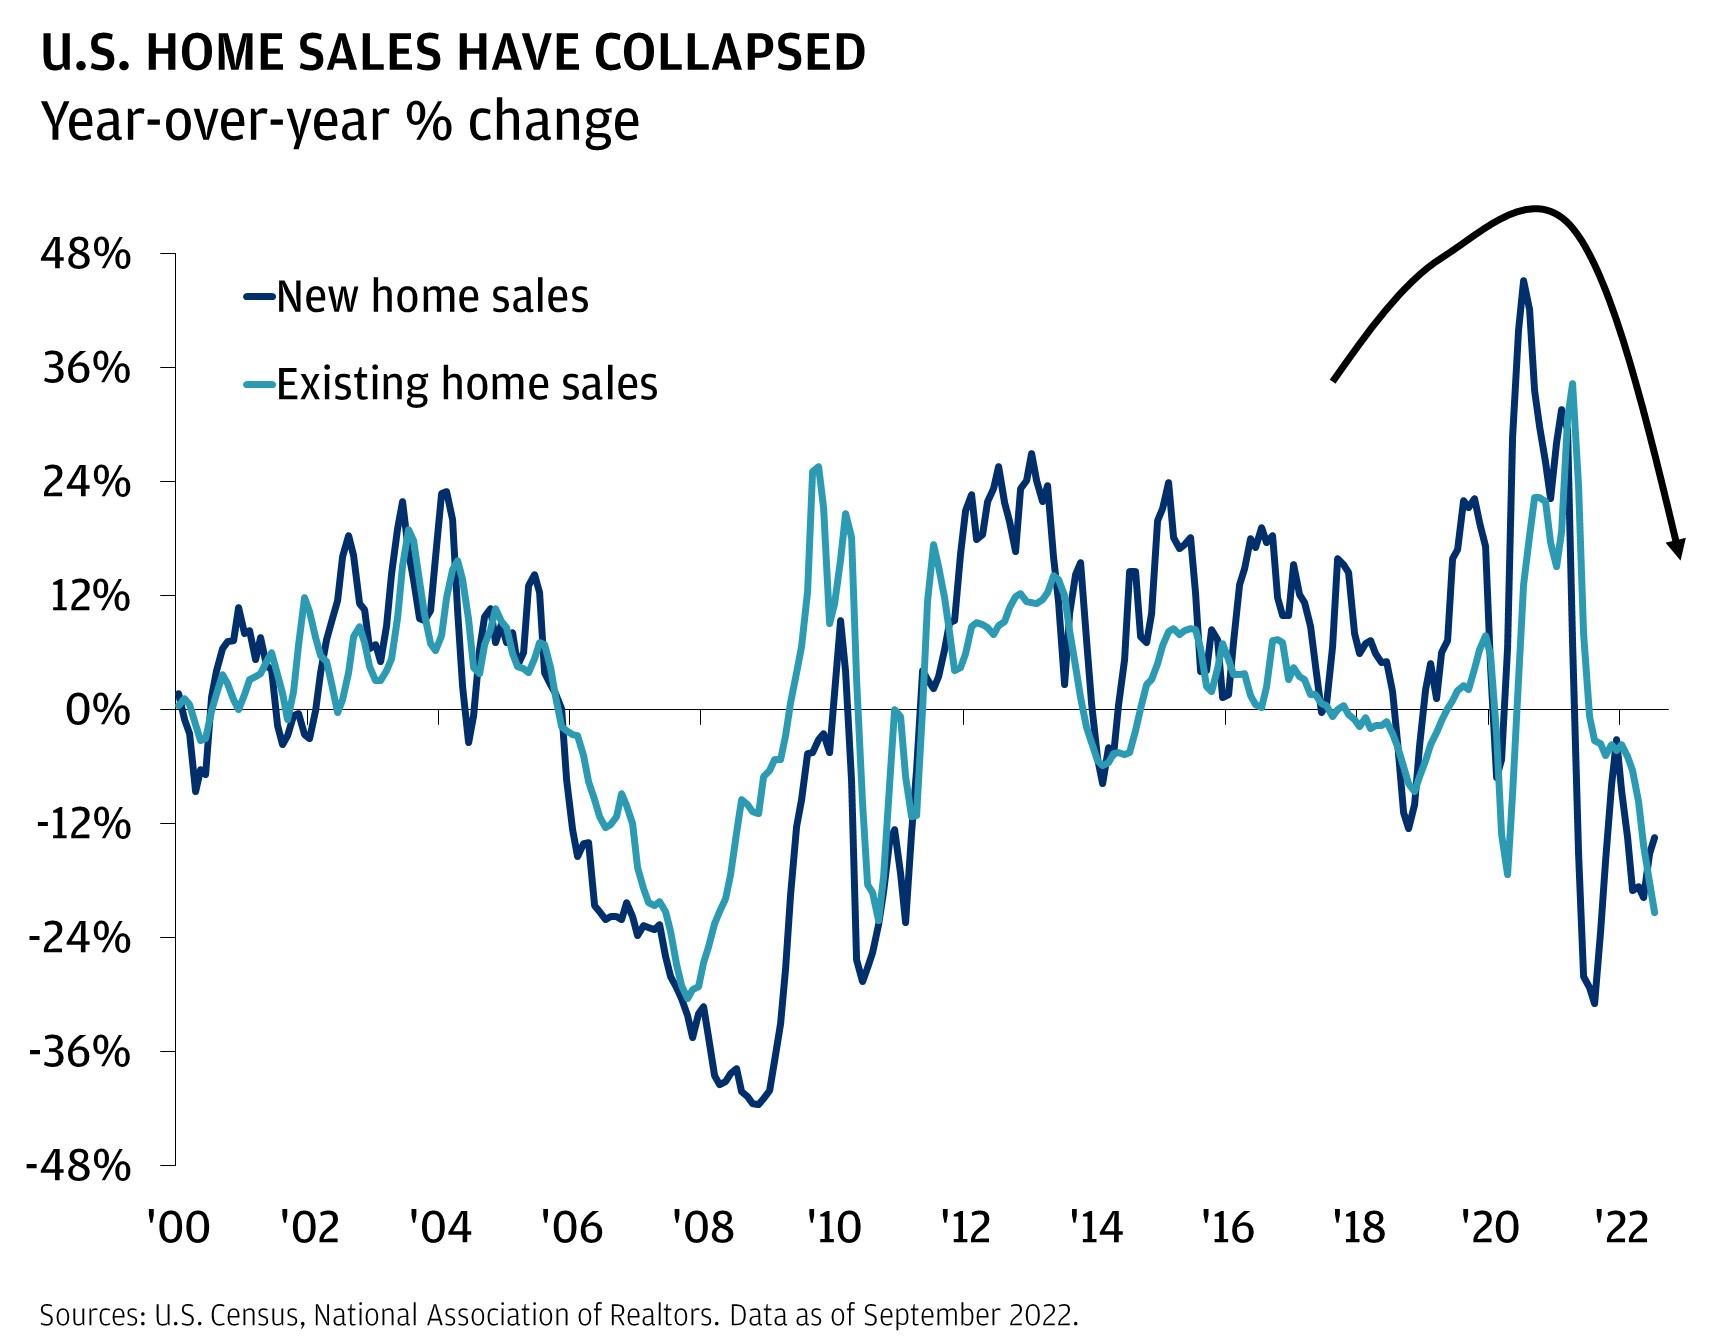 This charts shows the year-over-year change in new home sales vs. existing home sales in the United States from 2000 through September 2022.